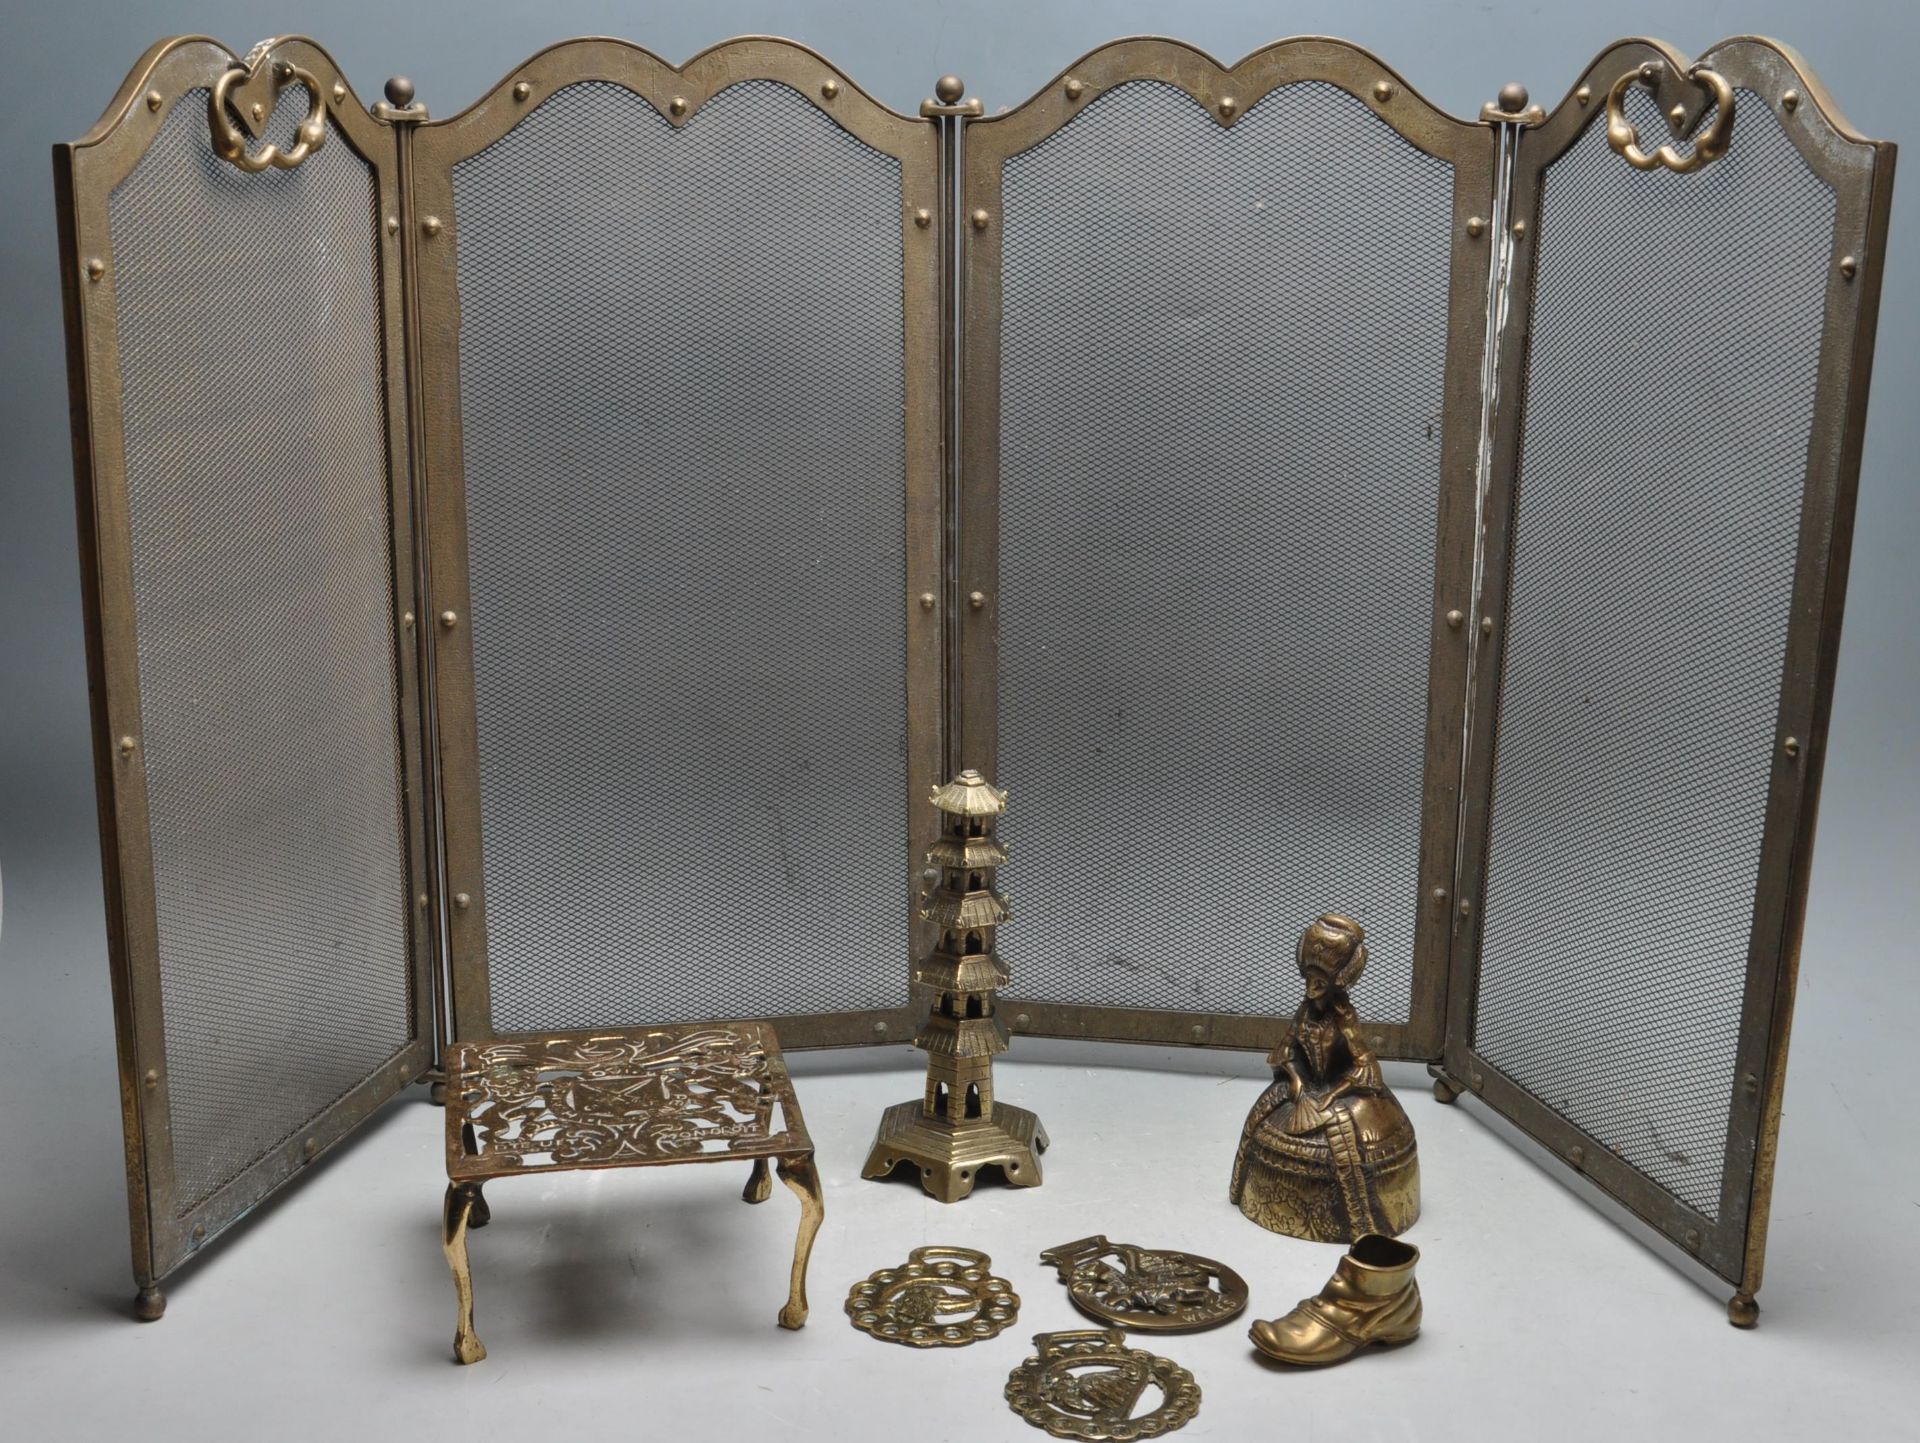 GROUP OF EARLY 20TH CENTURY BRASS WARE - FIRE GUARD, TRIVET